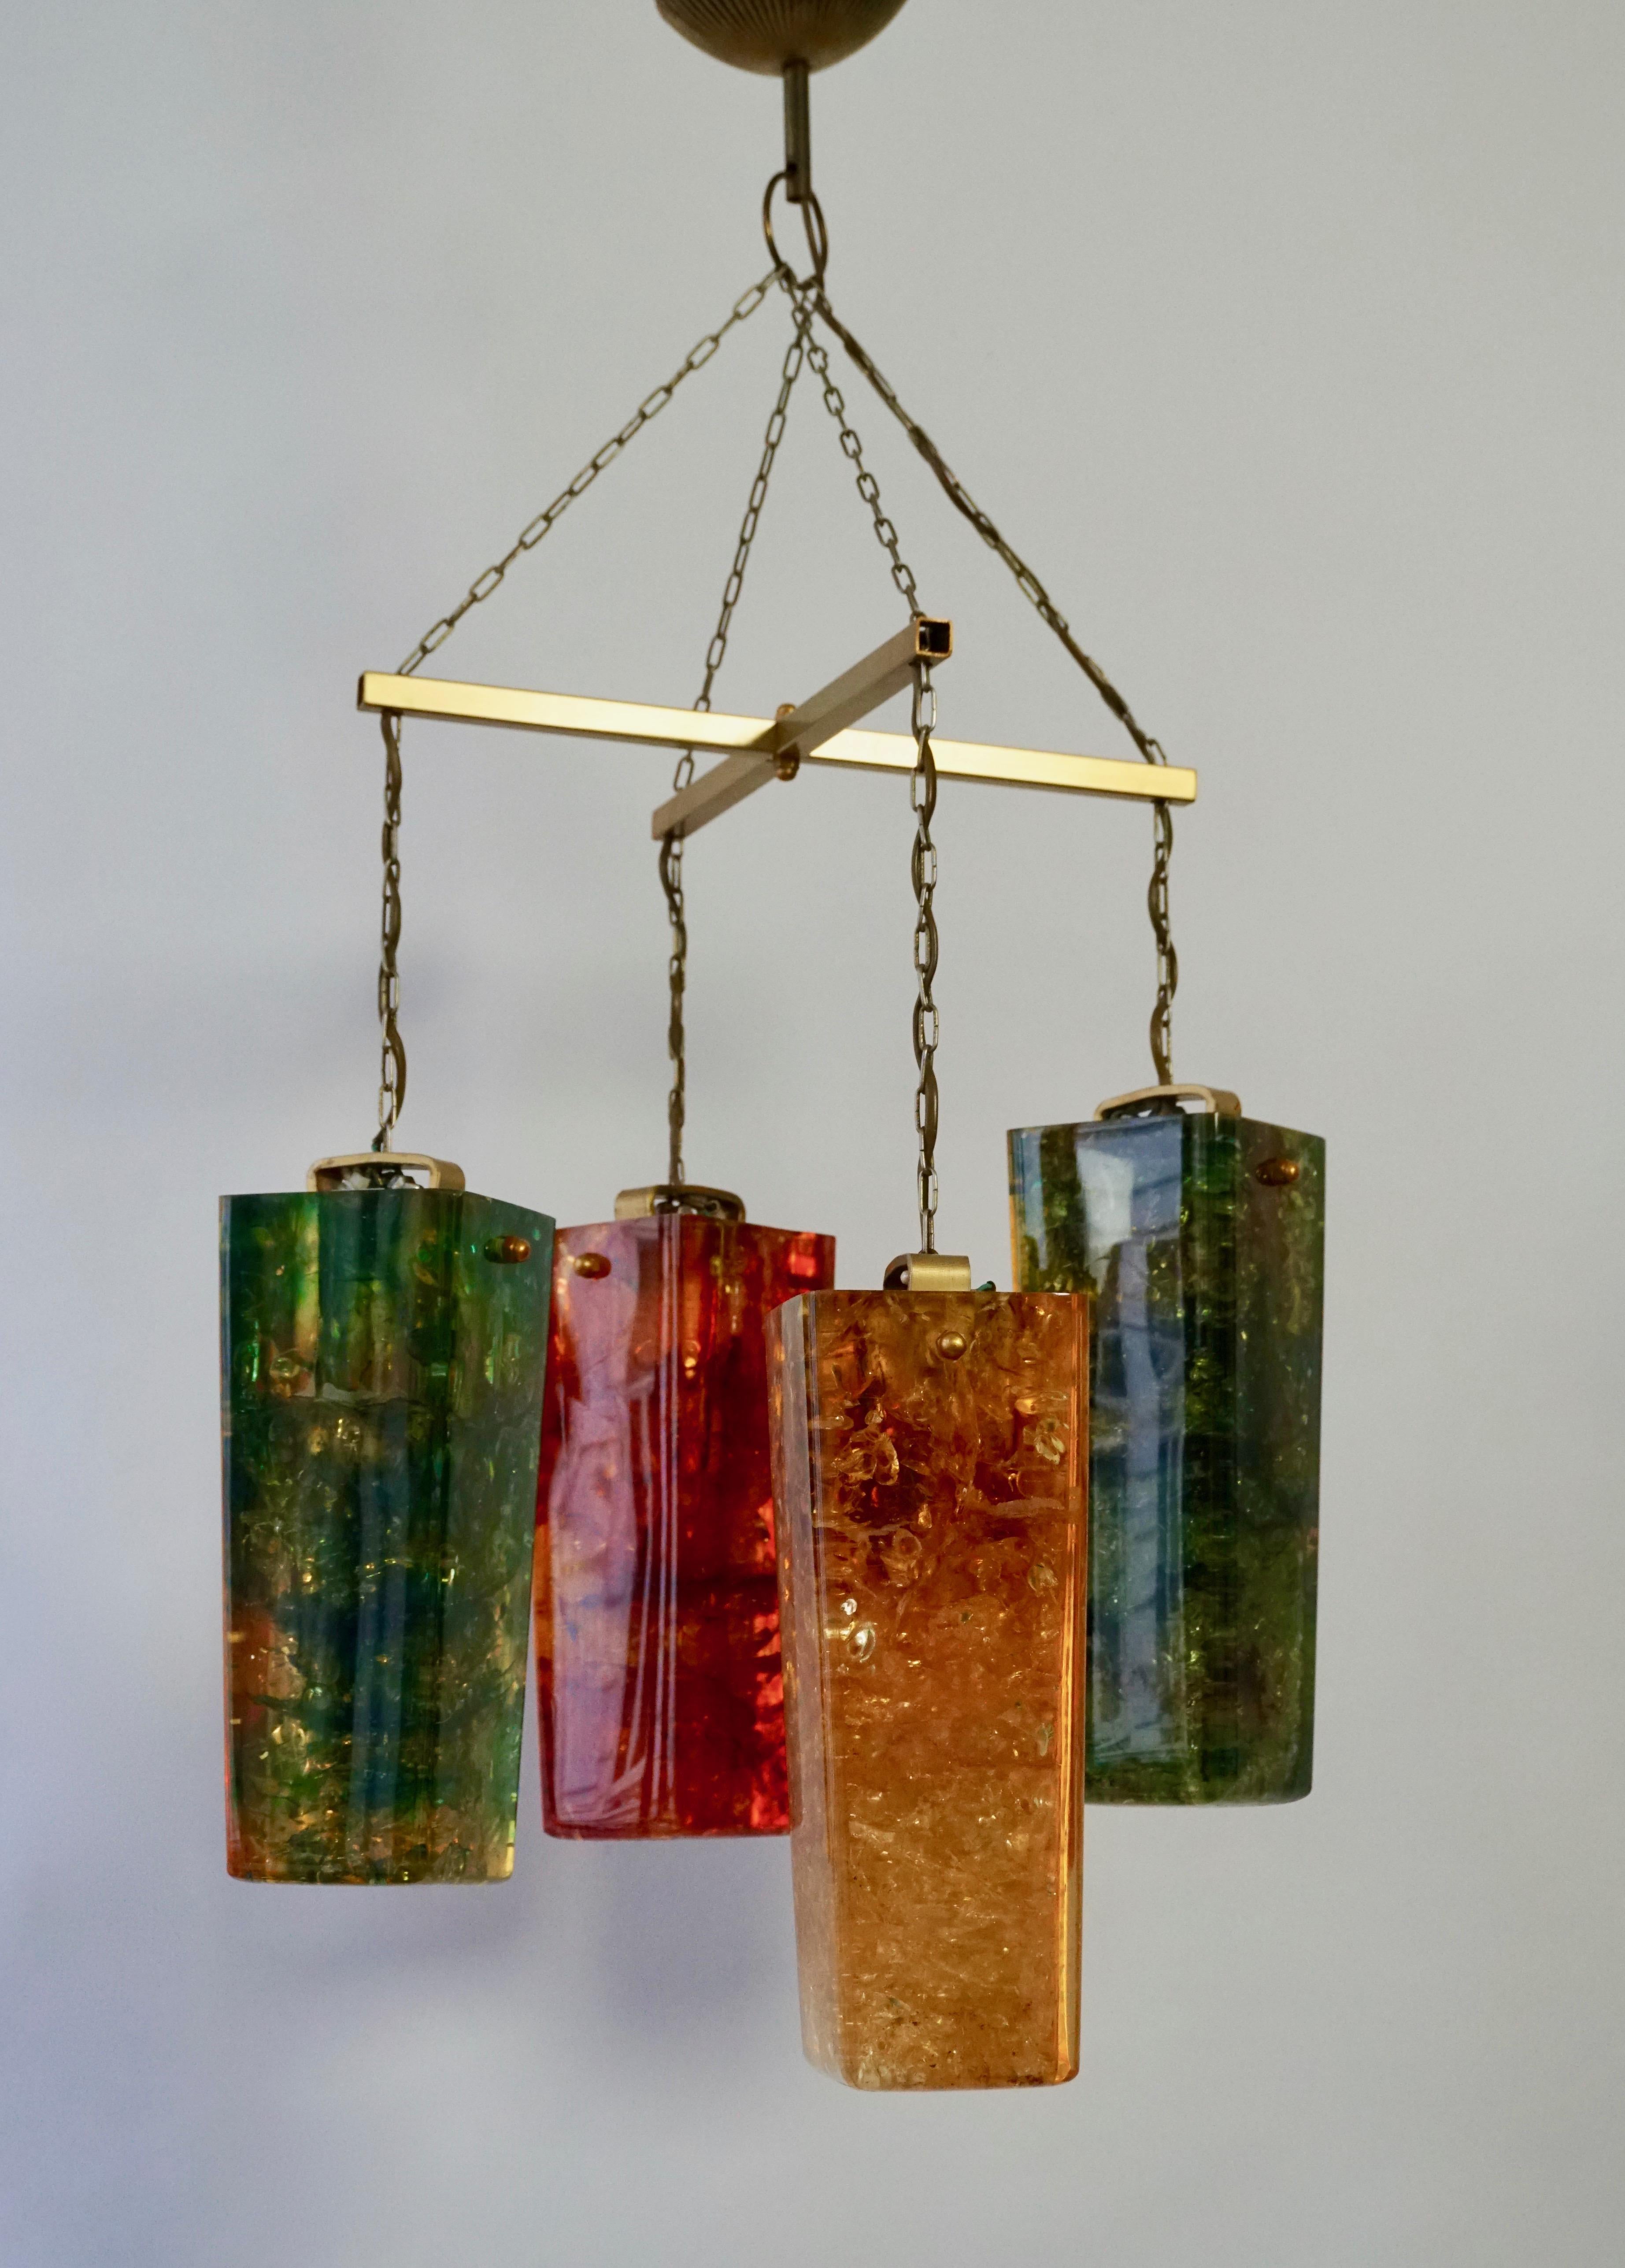 A rare and spectacular resin chandelier designed and edited by Pierre Giraudon, France, 1960-1970s.

Materials: 4 conical beams made of fractal synthetic resin, hollow inside. 2 in green, orange, and yellow. 1 in clear,  orange and yellow and 1 in